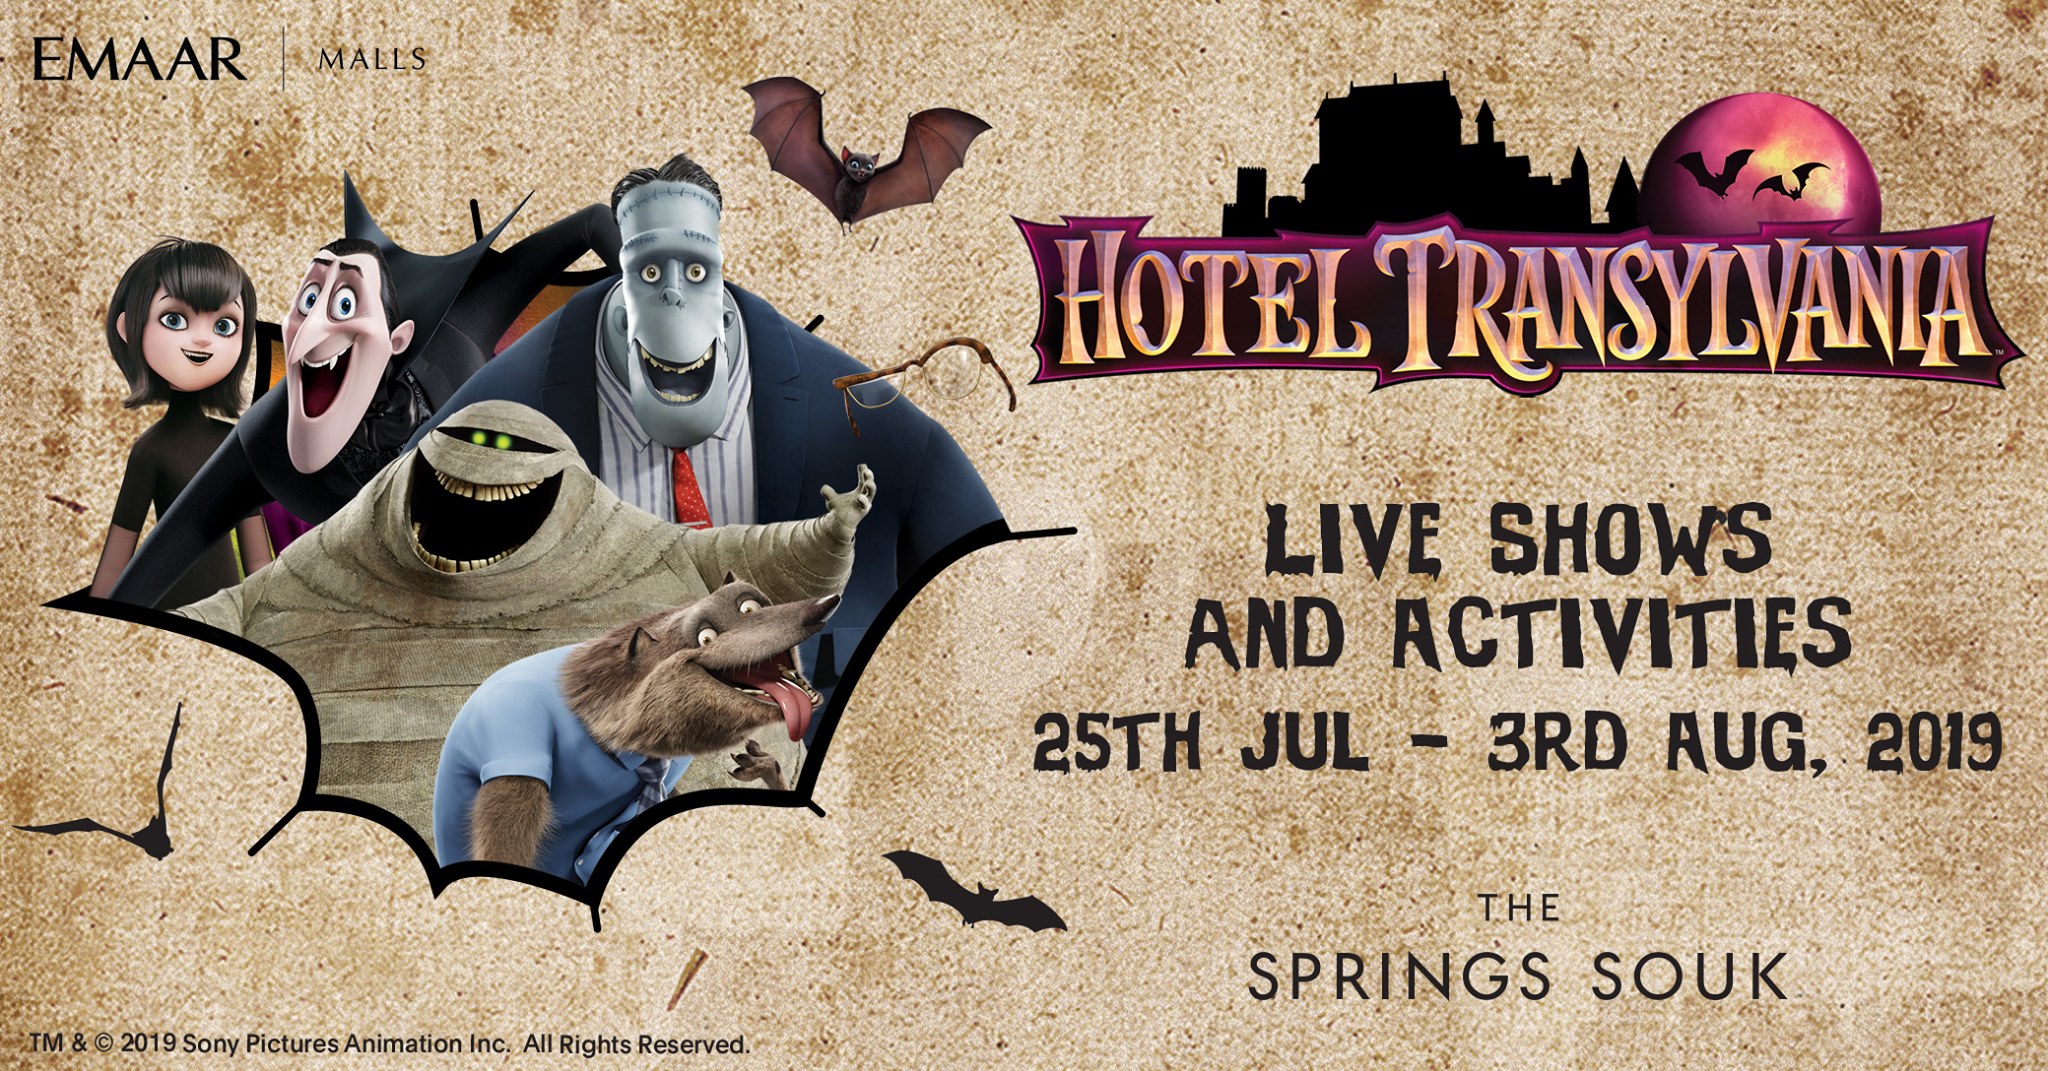 The Hotel Transylvania Live Show at The Springs Souk - Coming Soon in UAE